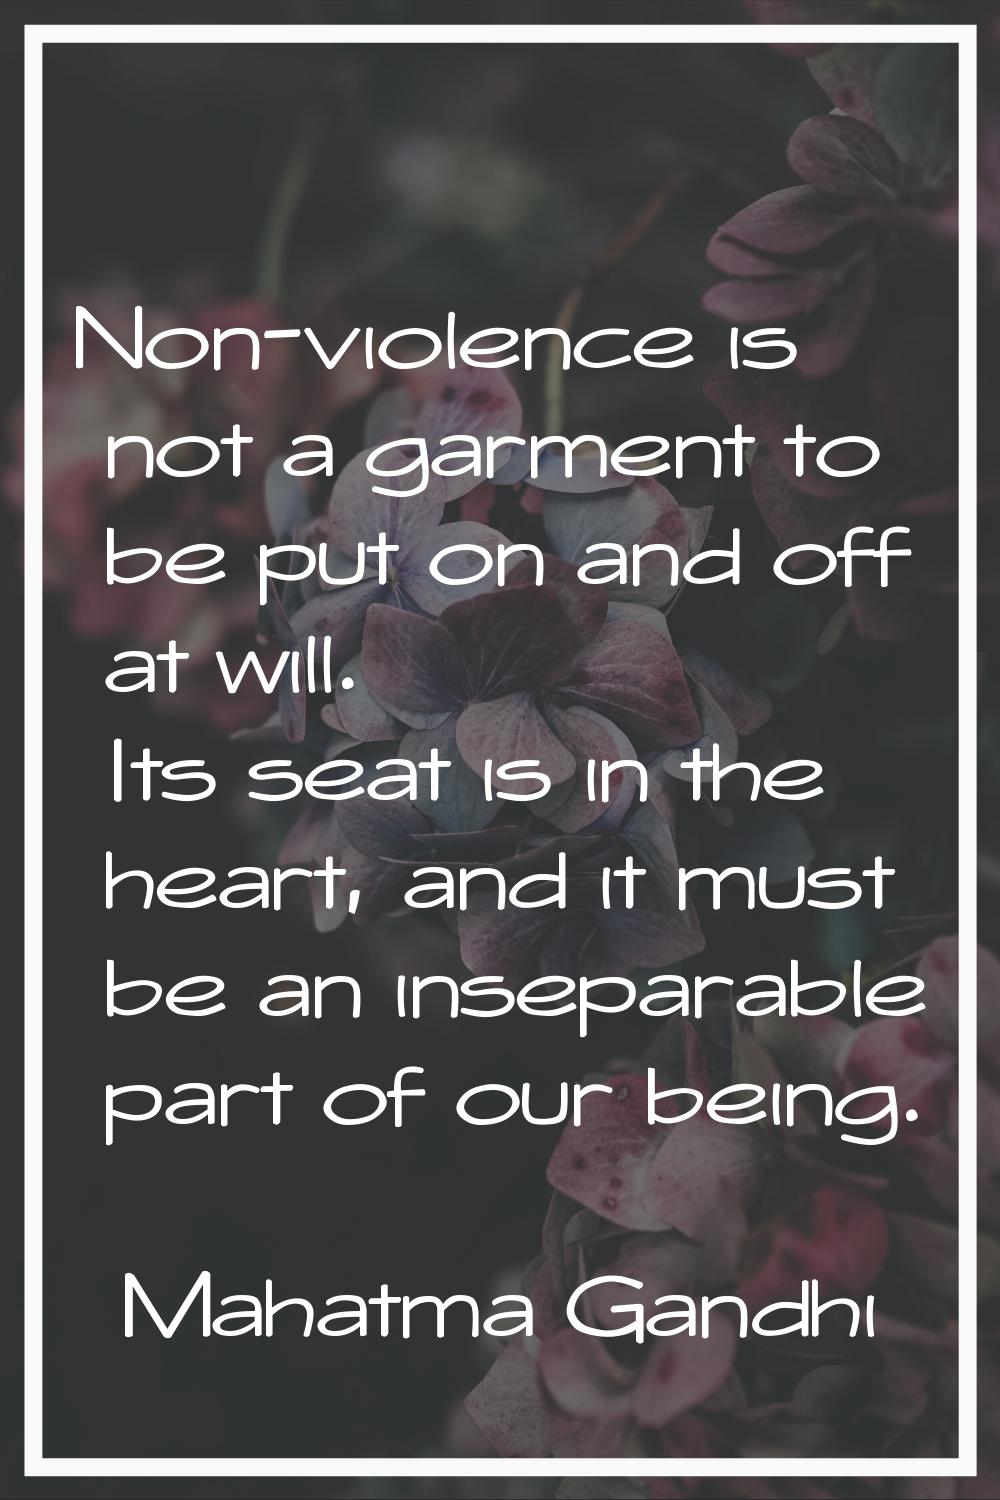 Non-violence is not a garment to be put on and off at will. Its seat is in the heart, and it must b